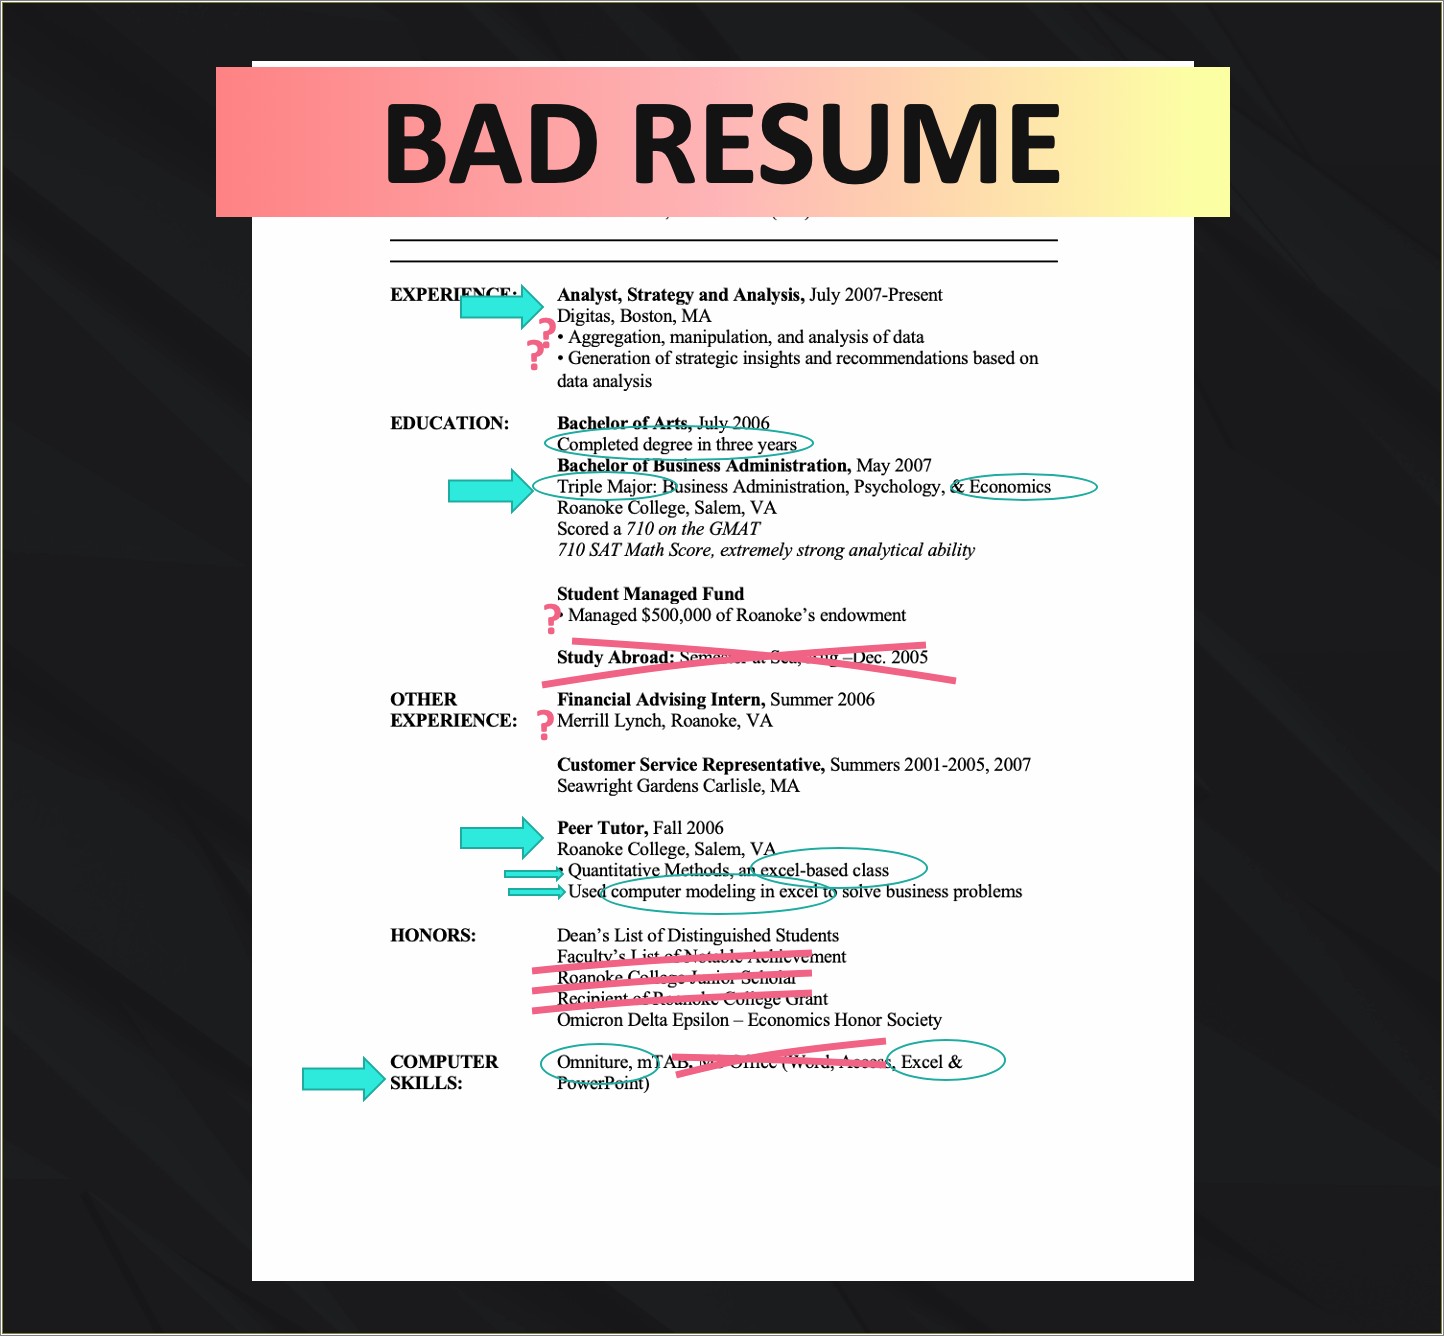 Computer Skills That Look Good On A Resume